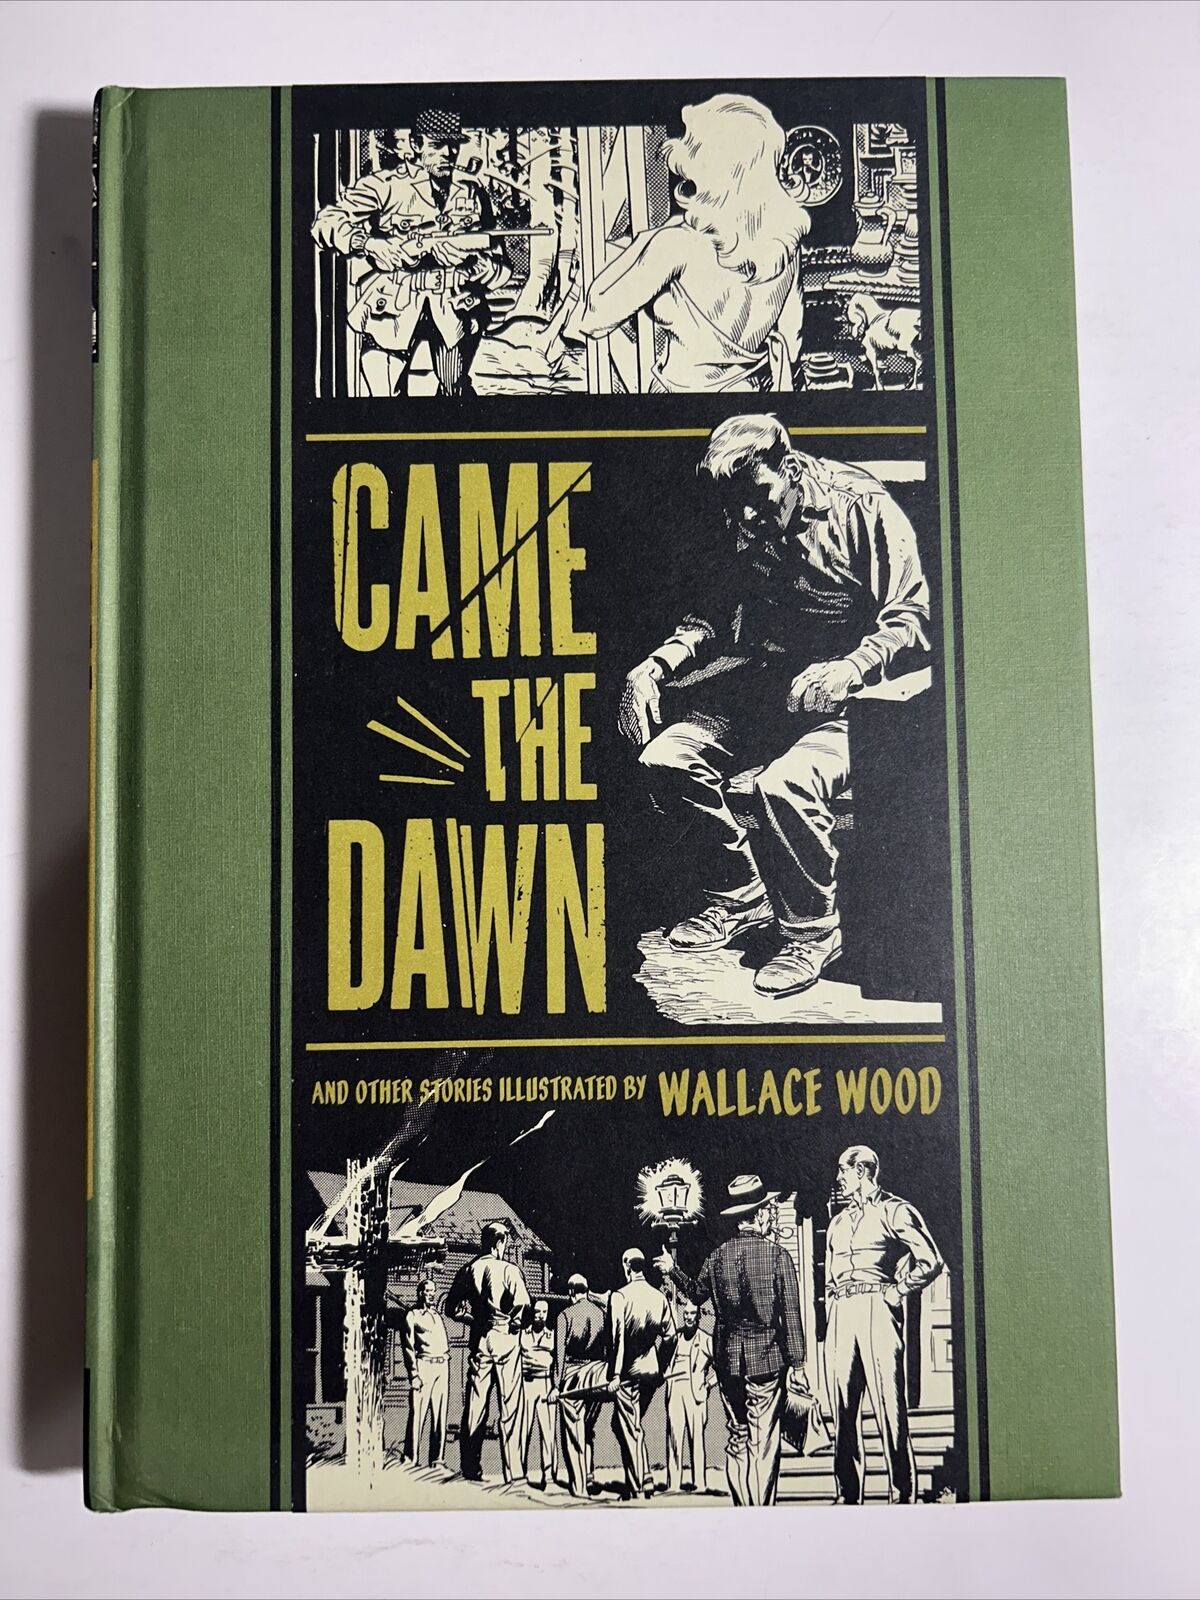 Came The Dawn: And Other Stories by Wally Wood Al Feldstein EC Library Hardcover